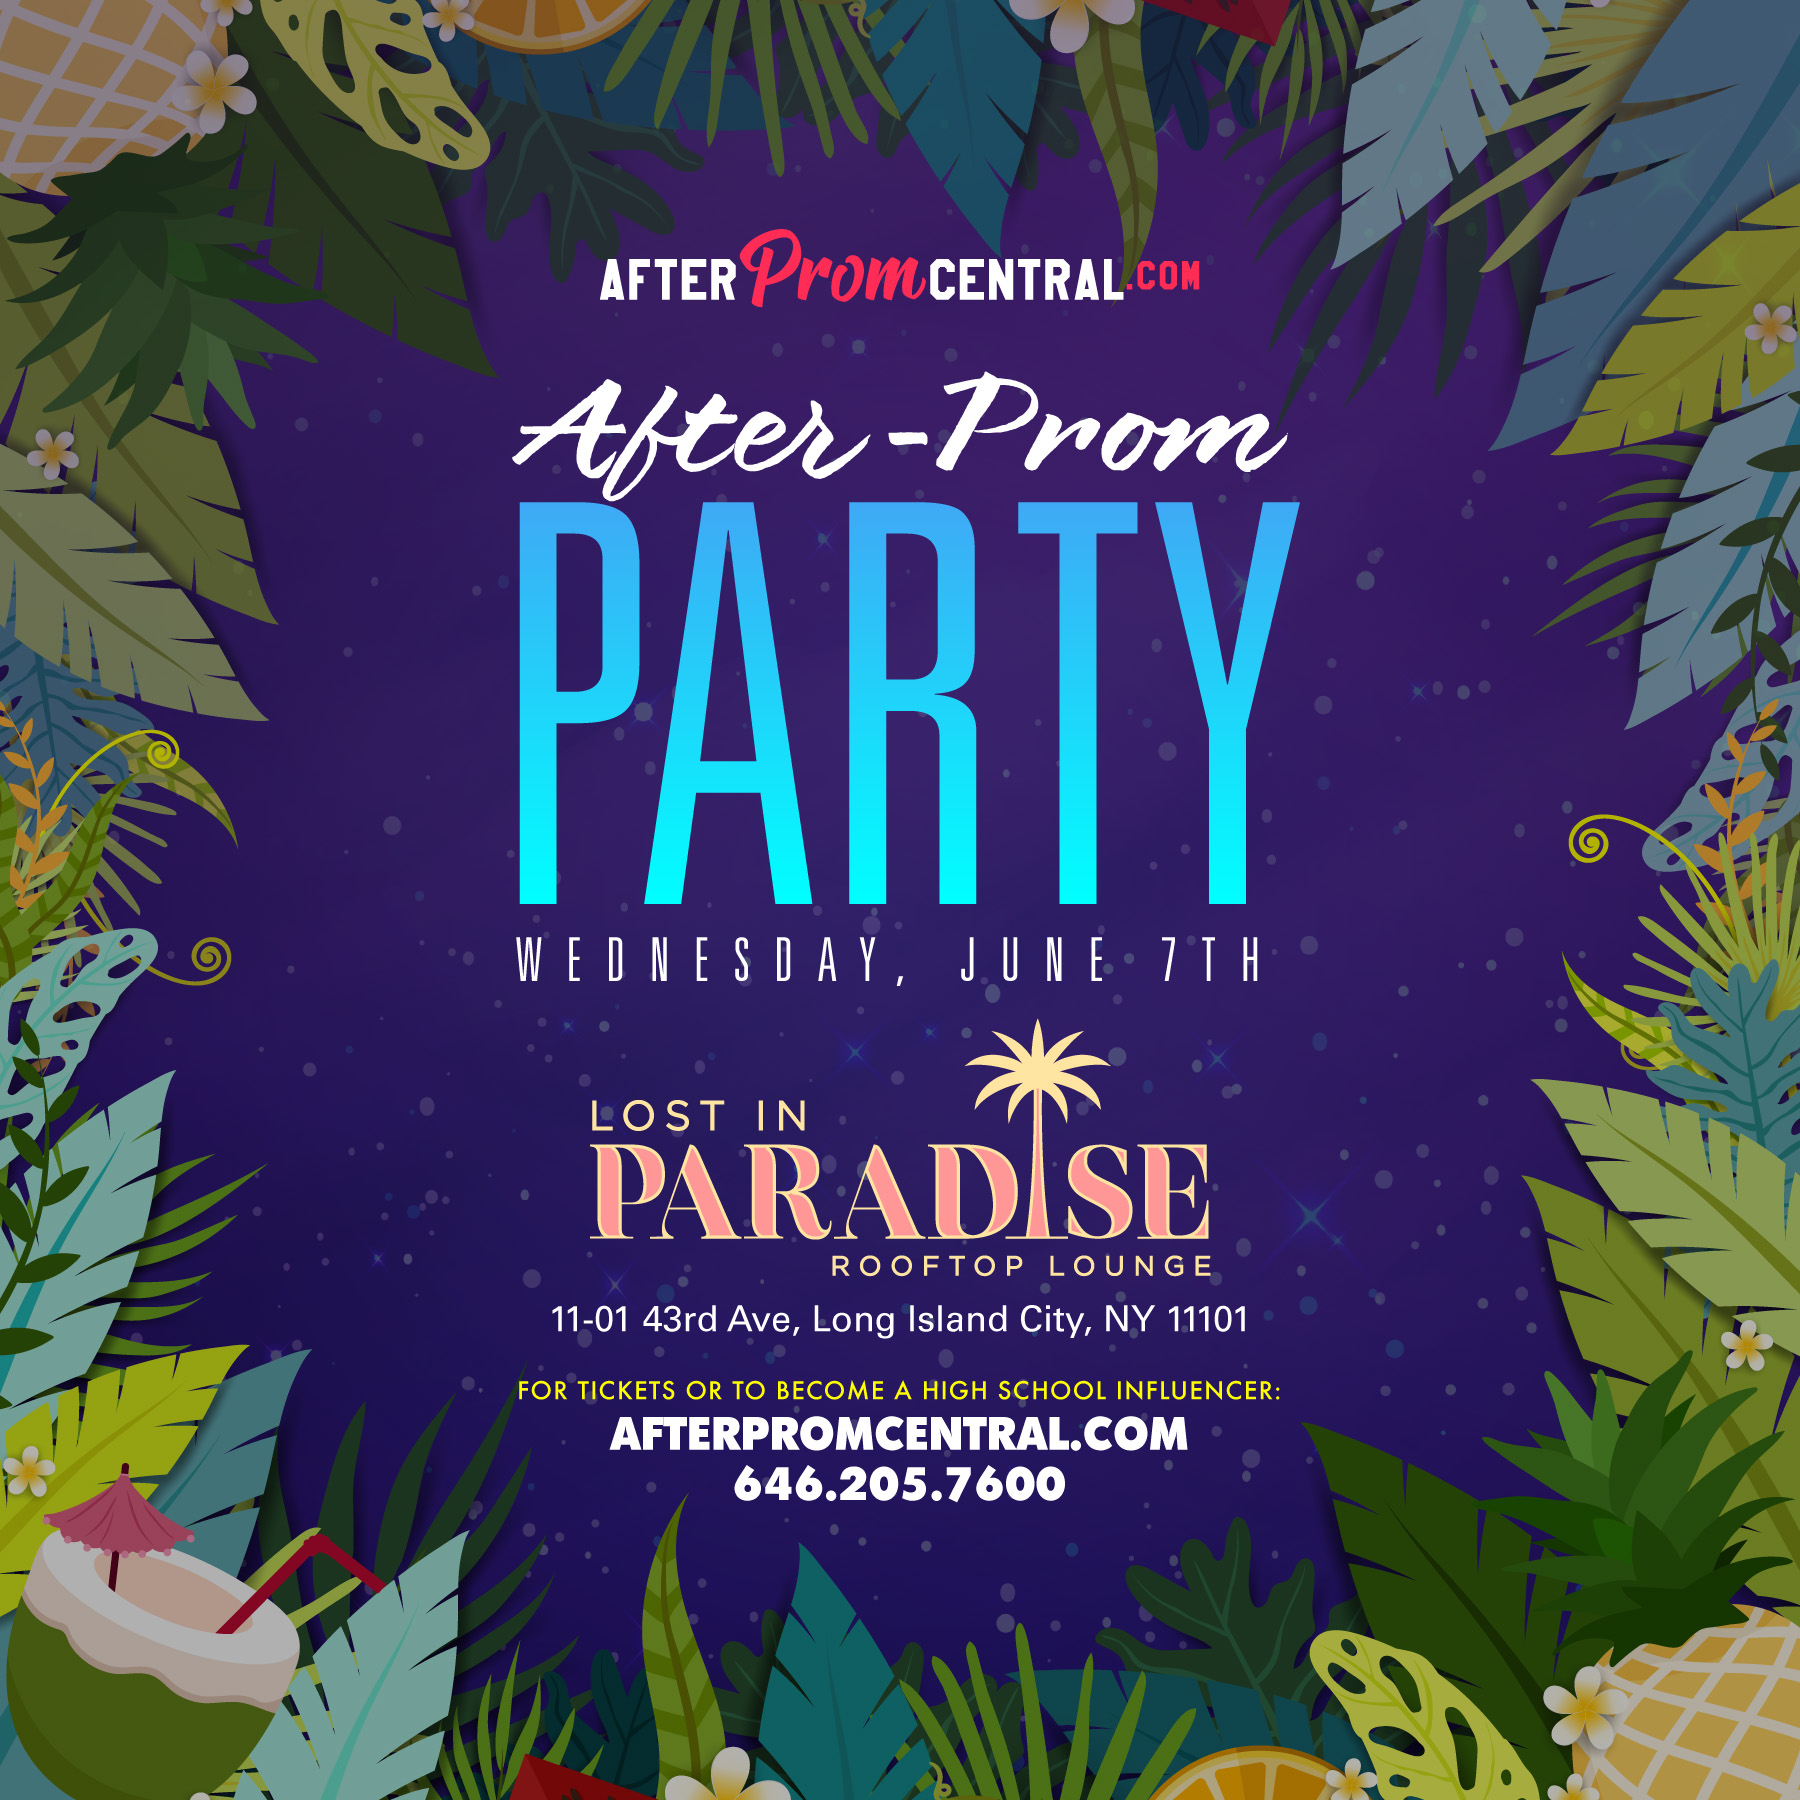 After Prom Parties at Lost in Paradise Rooftop in Queens LIC